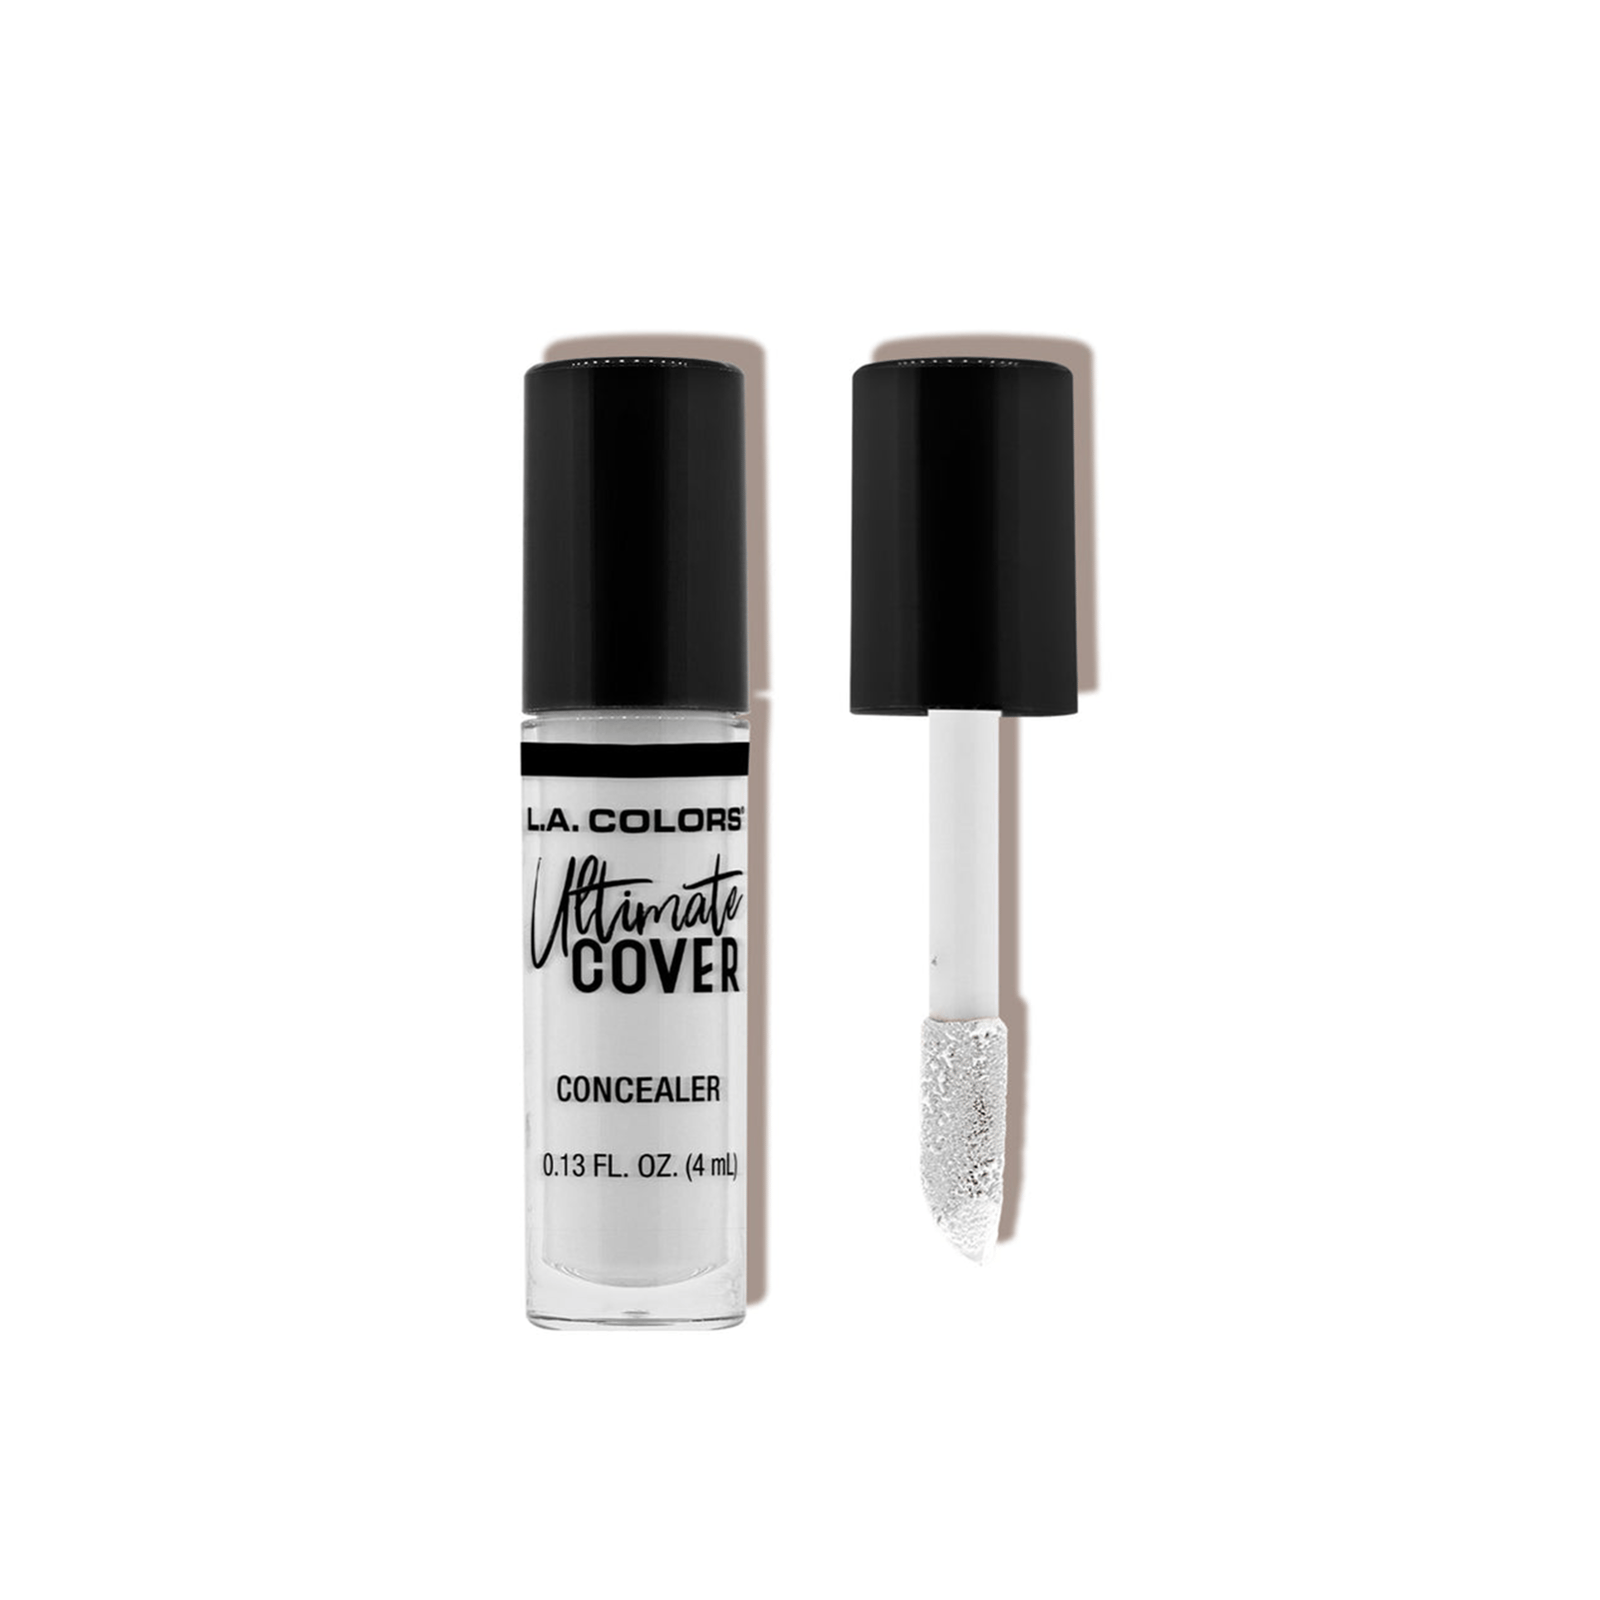 L.A. Colors Ultimate Cover Concealer CC901 Sheer White Corrector 4ml (0.13 fl oz)